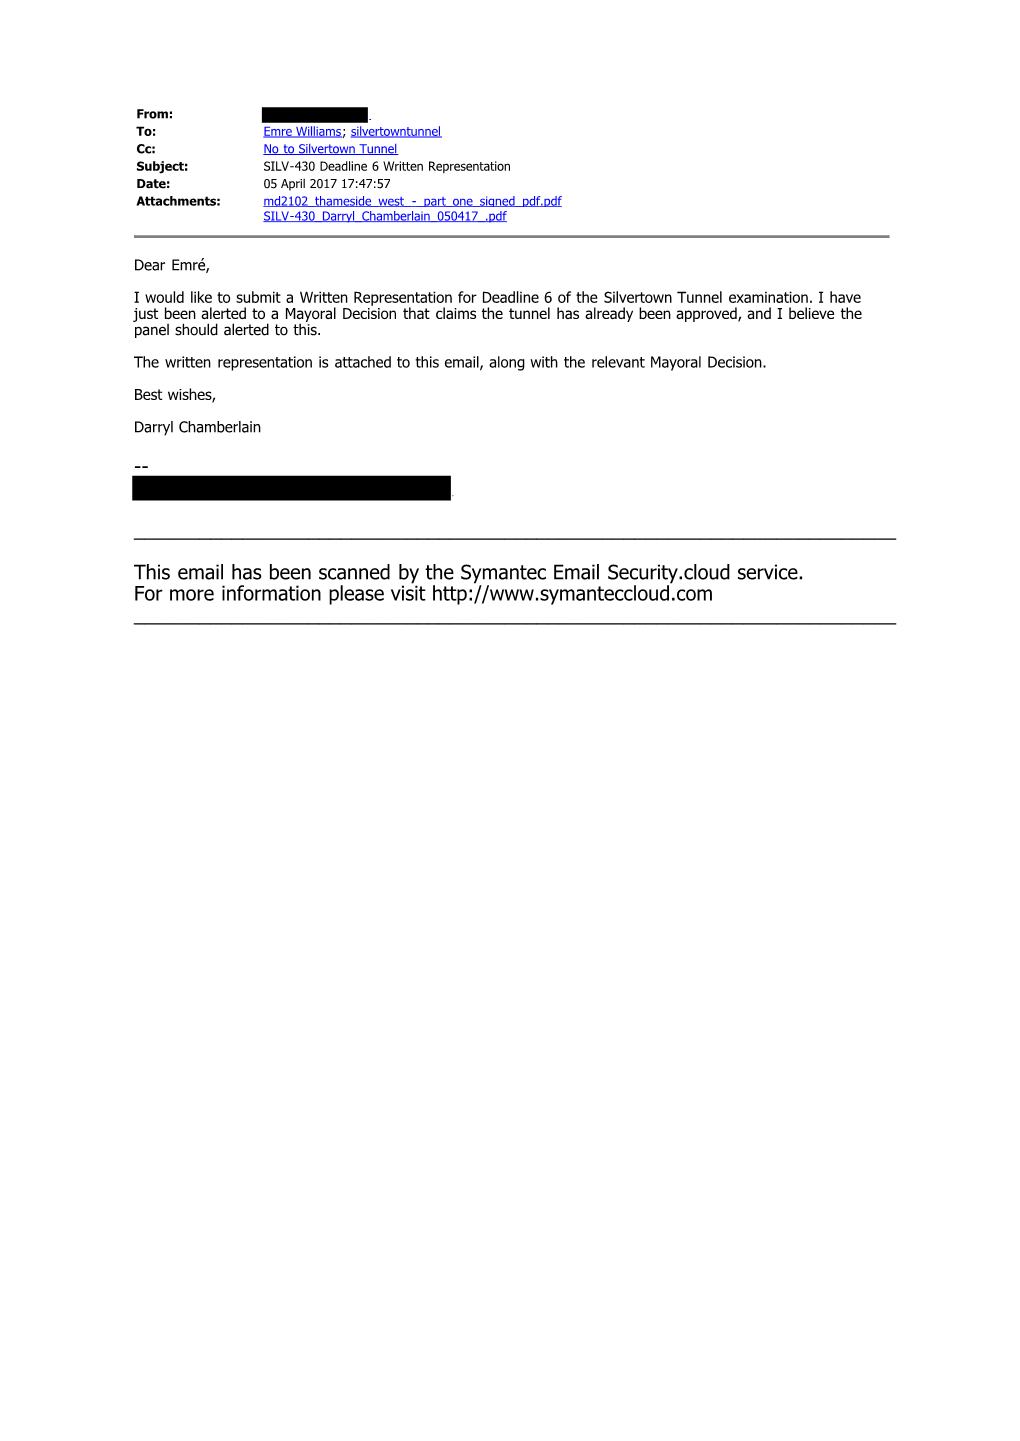 This Email Has Been Scanned by the Symantec Email Security.Cloud Service